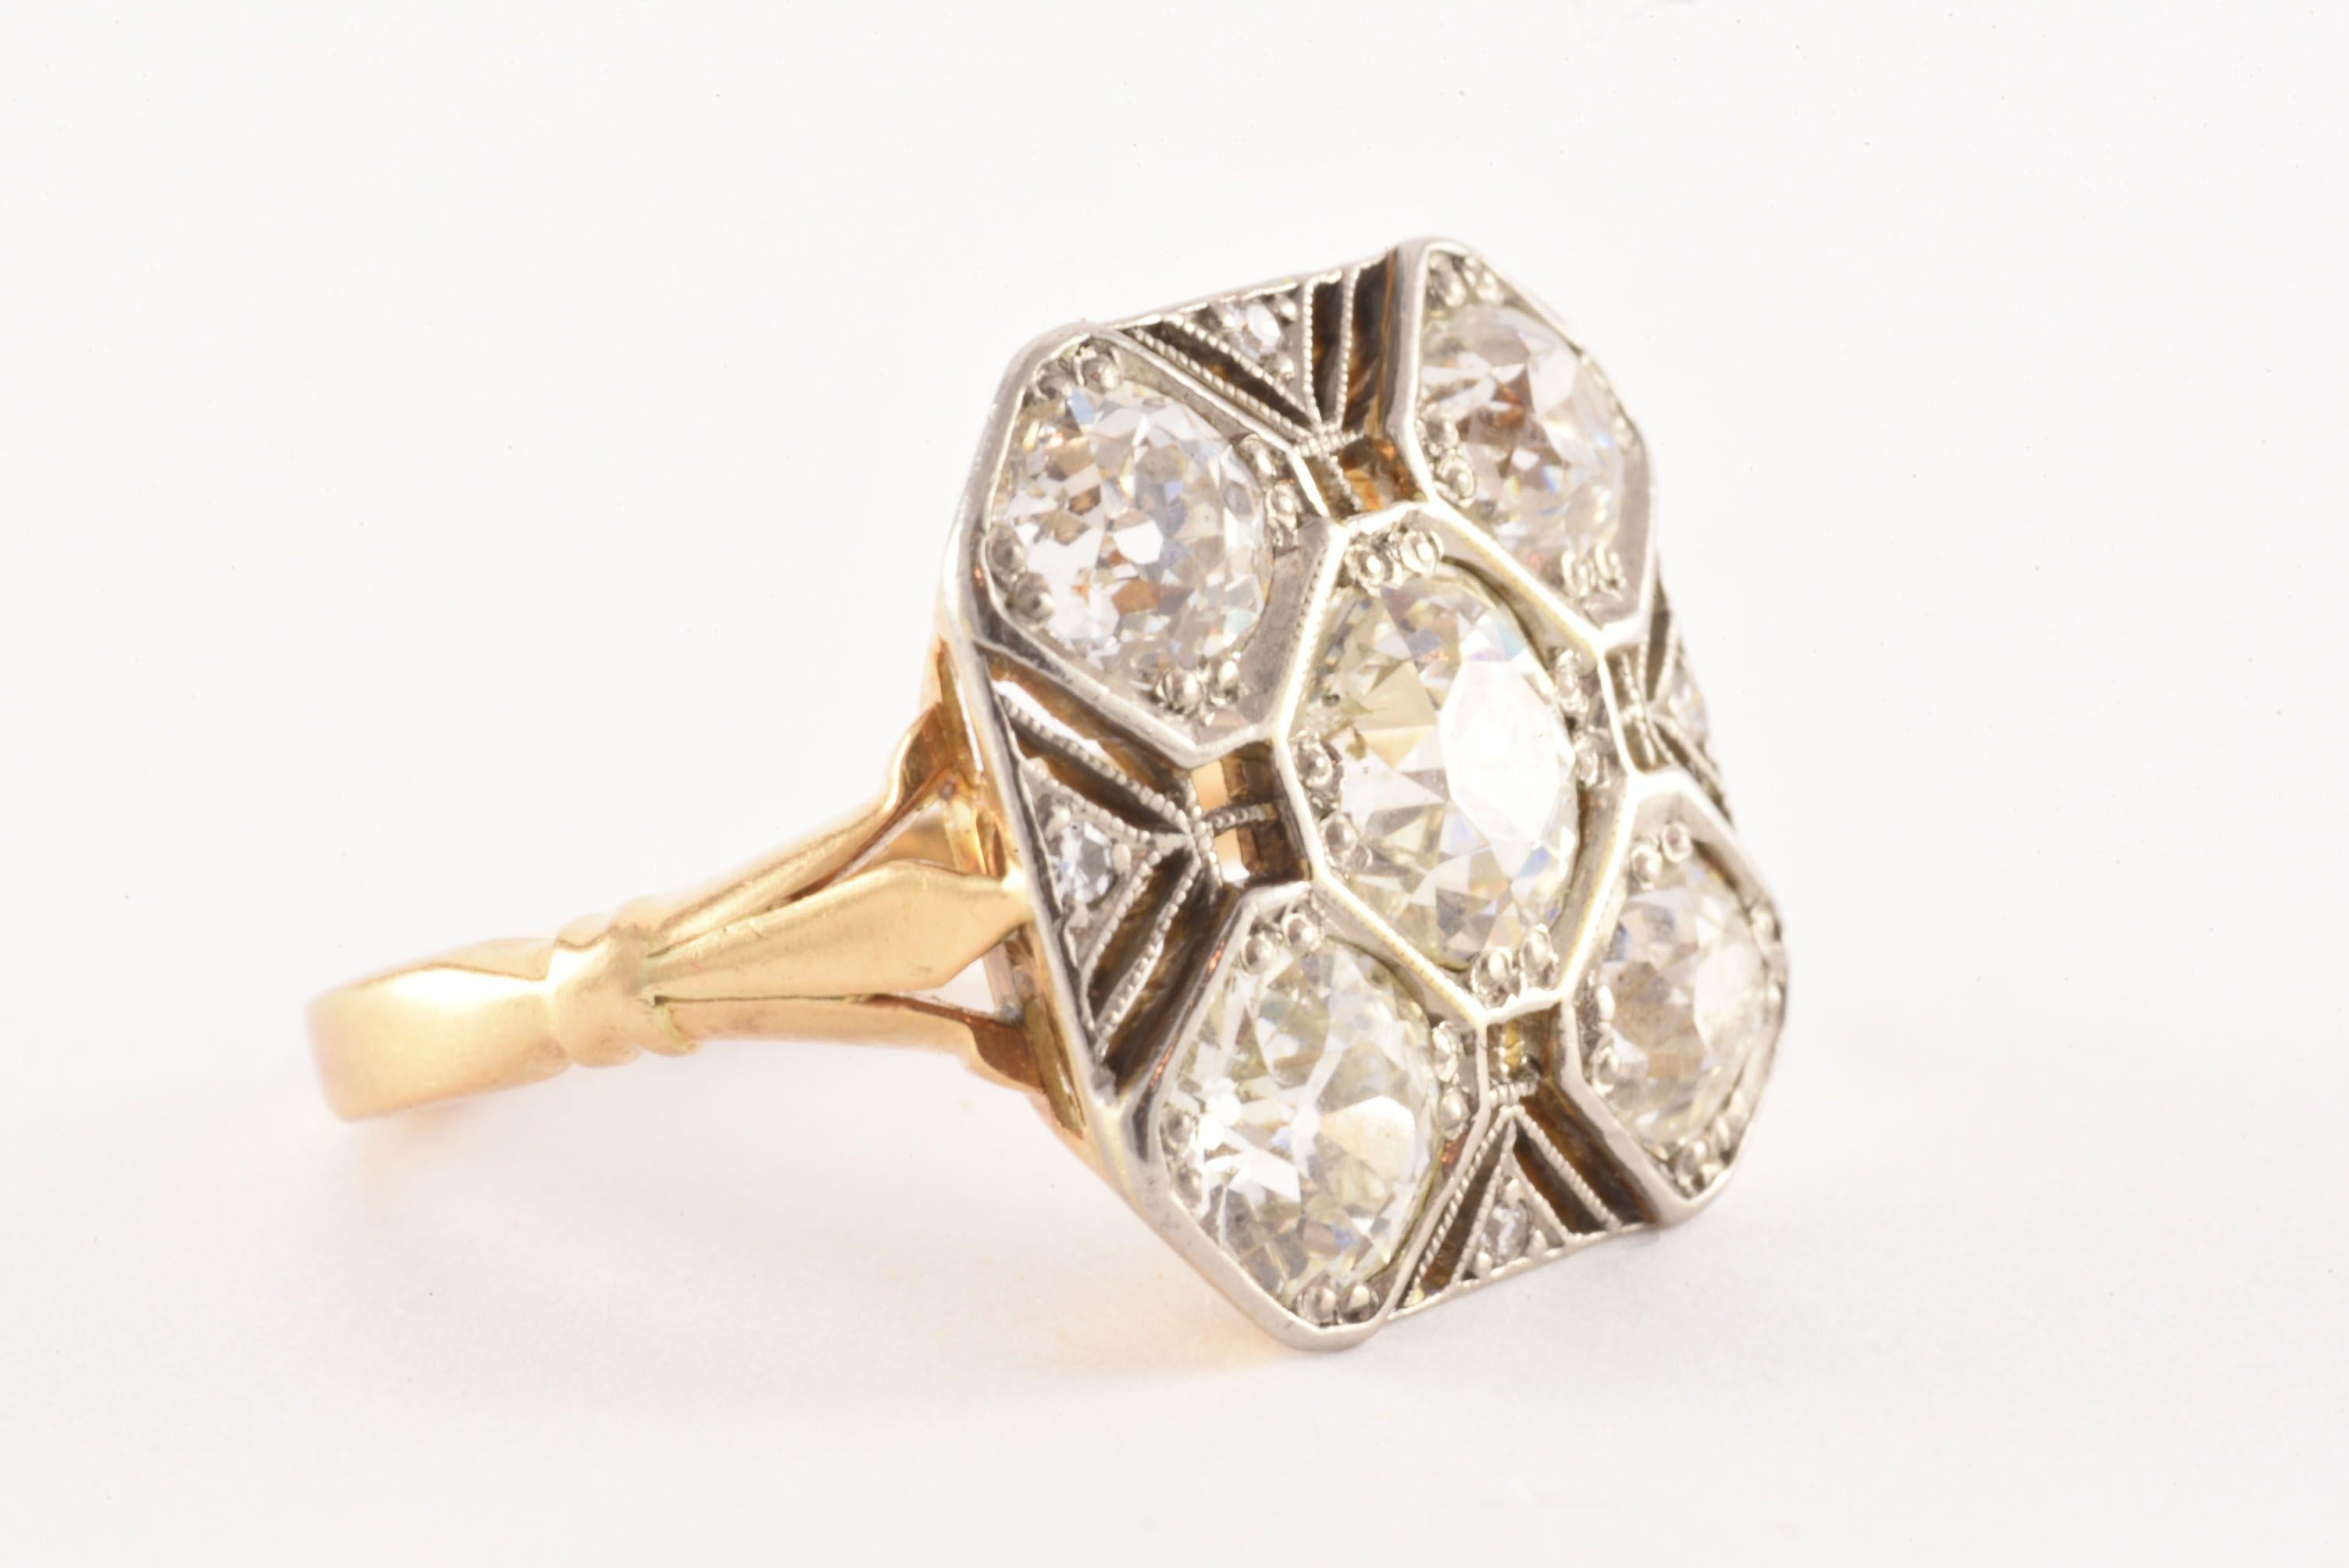 Crafted in the 1930s from 18kt yellow gold and platinum, this stunning two-toned octagonal shaped band features an Old European cut diamond center stone weighing approximately 1.15 carats, G color, SI clarity, surrounded by four Old European cut